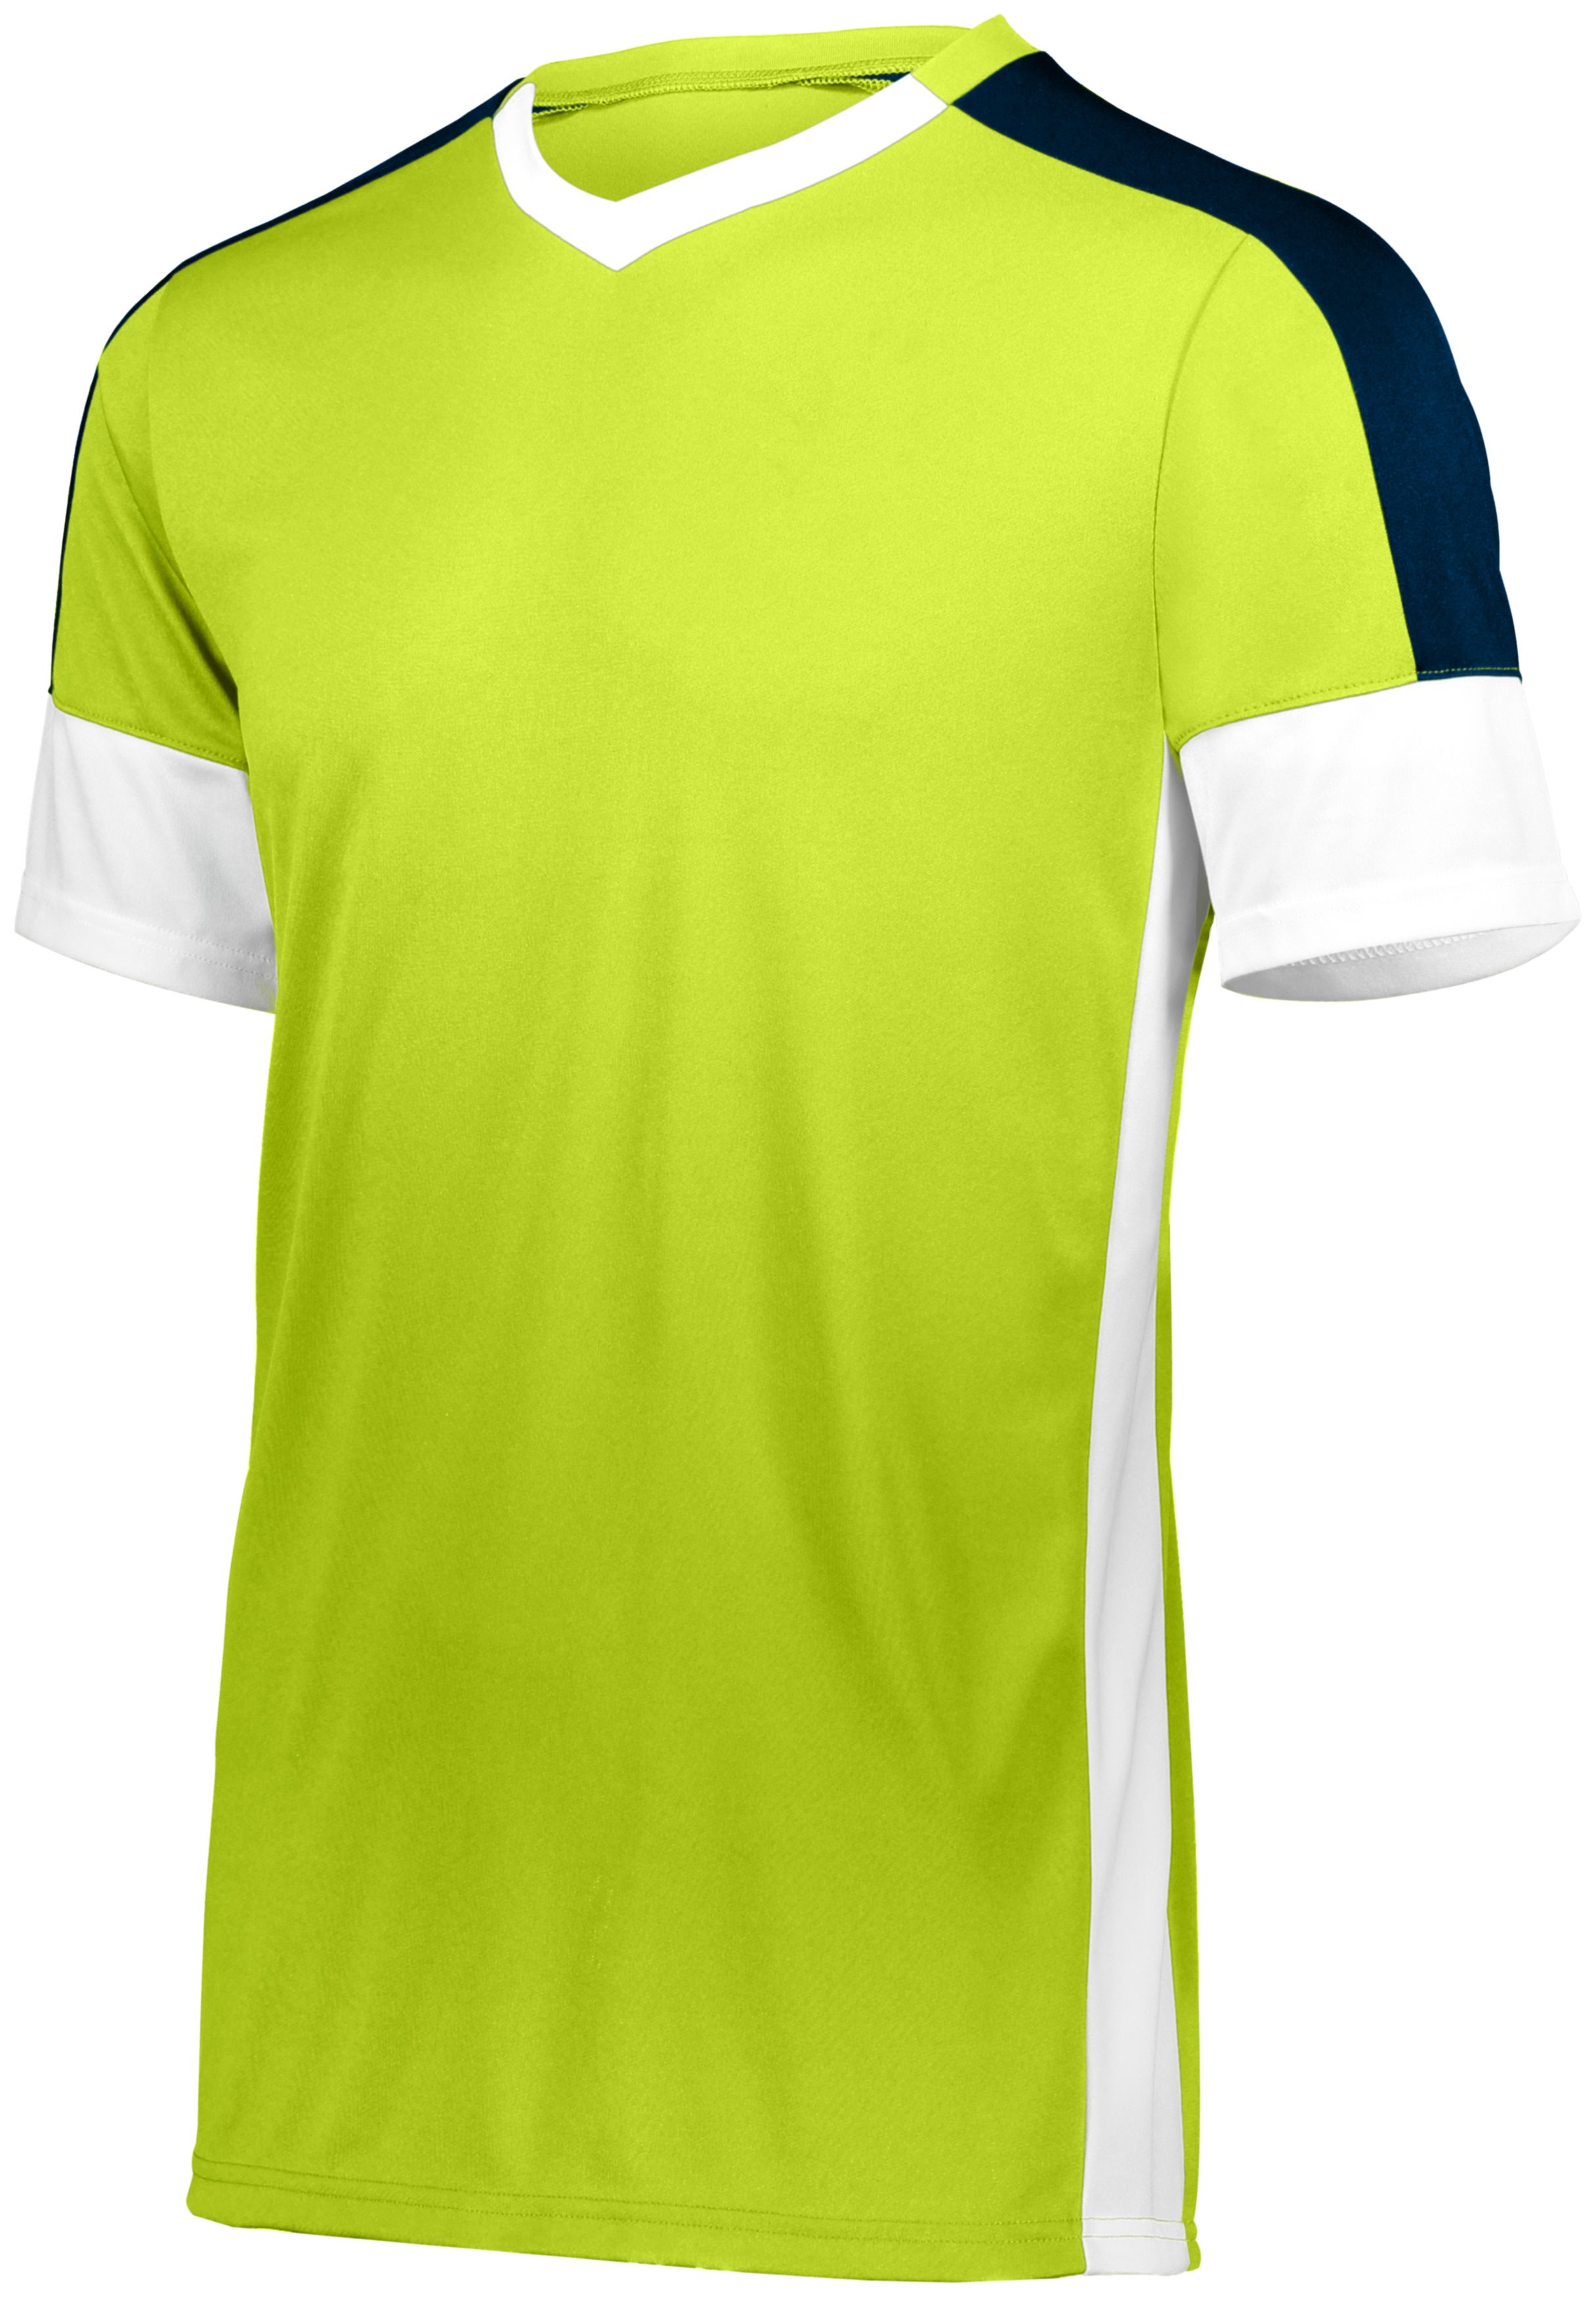 click to view Lime/White/Navy